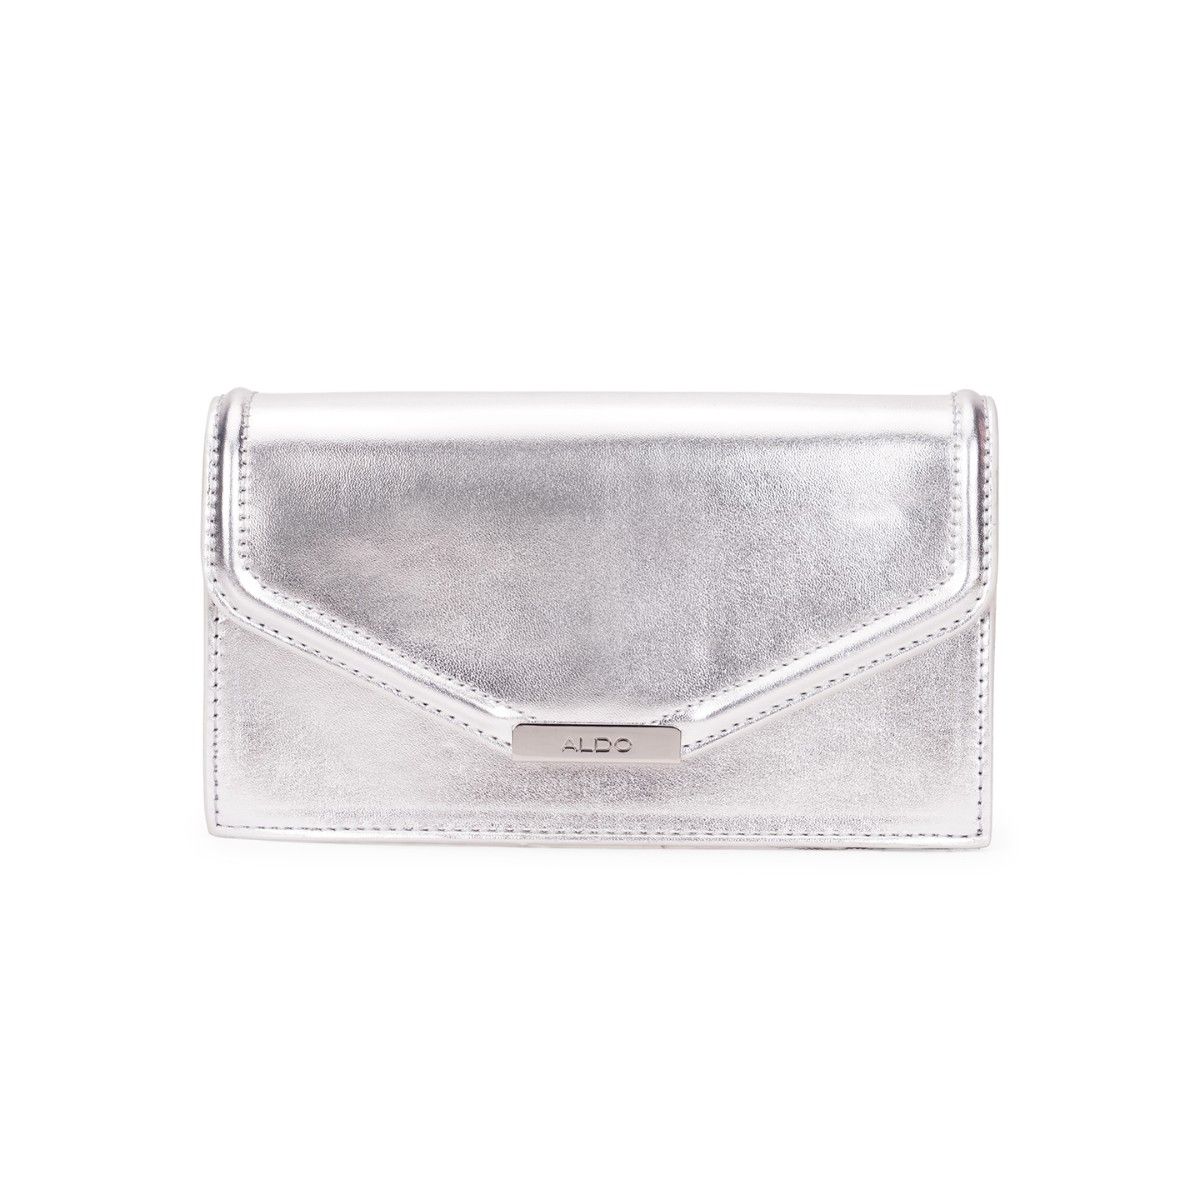 Women's ALDO Clutches and evening bags from $21 | Lyst